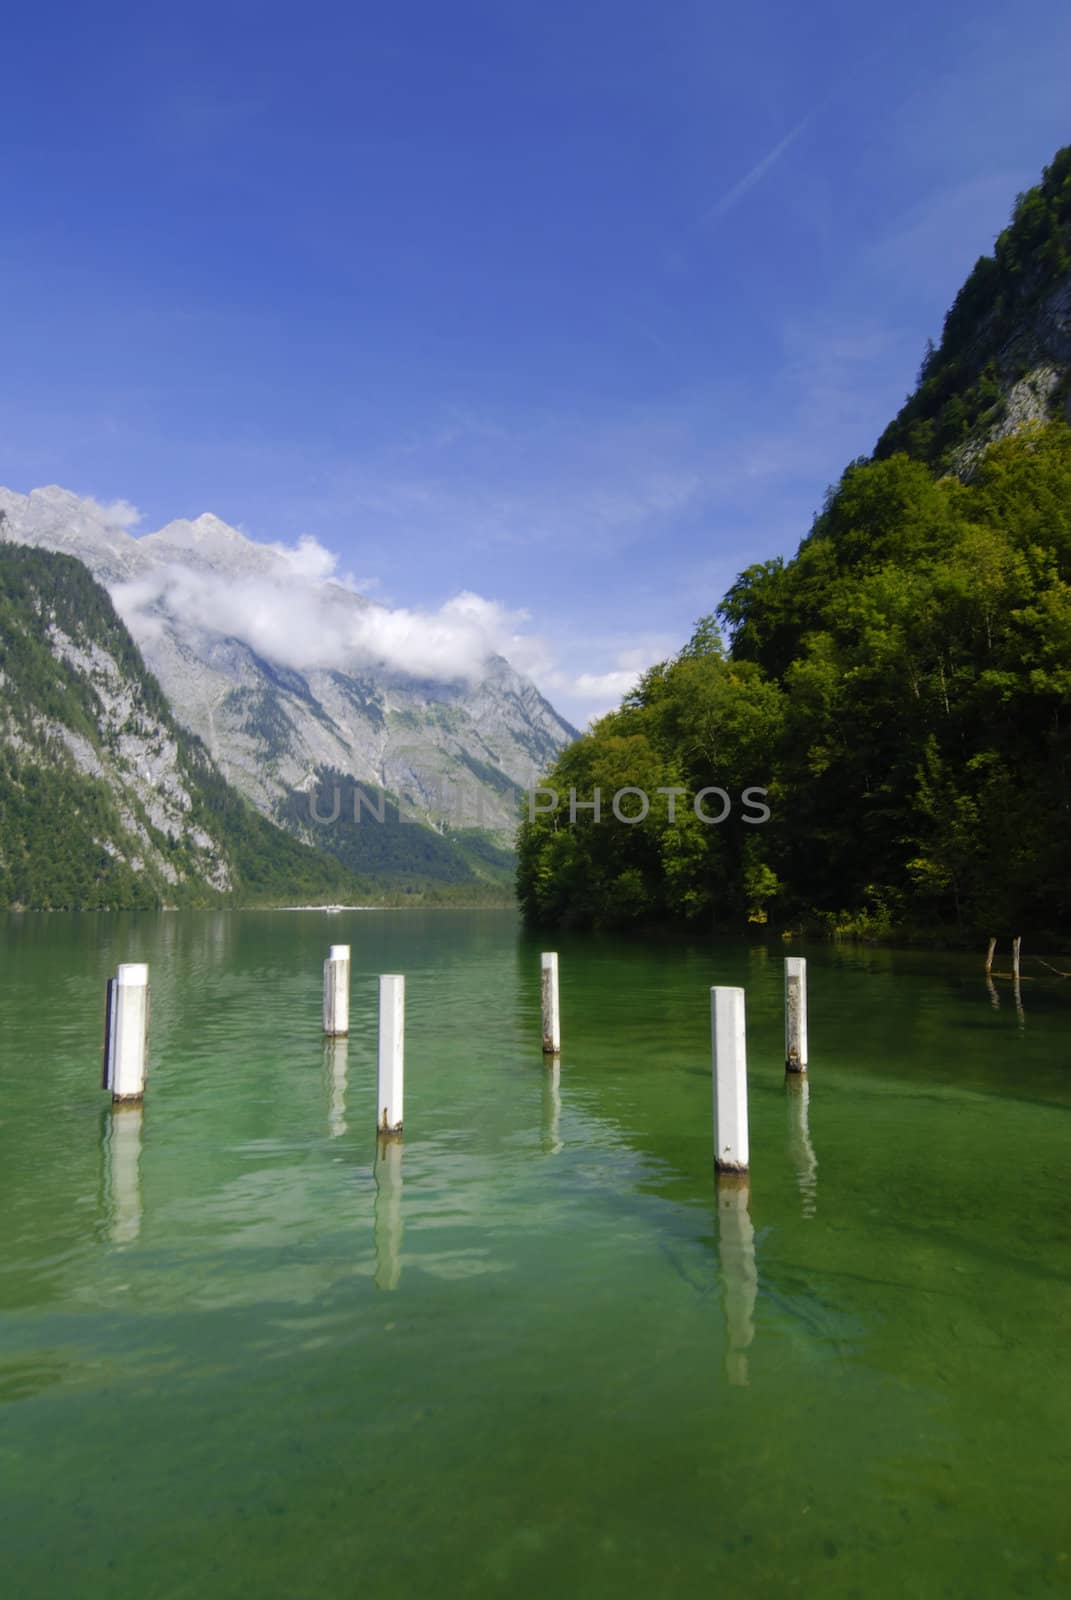 Famous lake Konigssee with boat pier and mountains with clouds